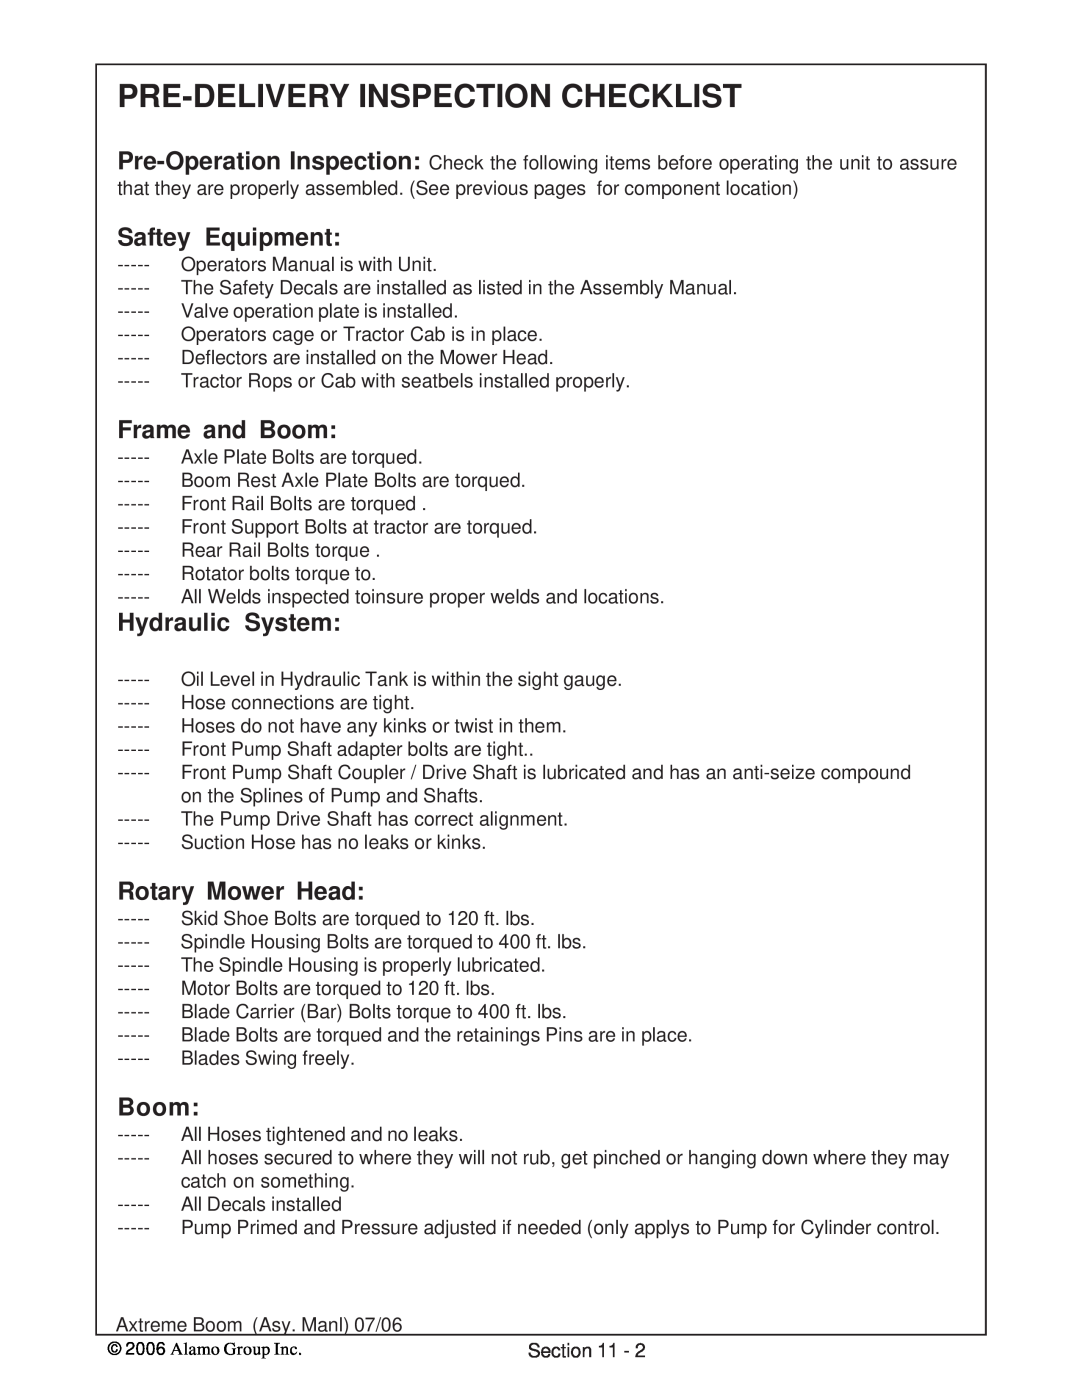 Alamo 02984405 Pre-Delivery Inspection Checklist, Saftey Equipment, Frame and Boom, Hydraulic System, Rotary Mower Head 